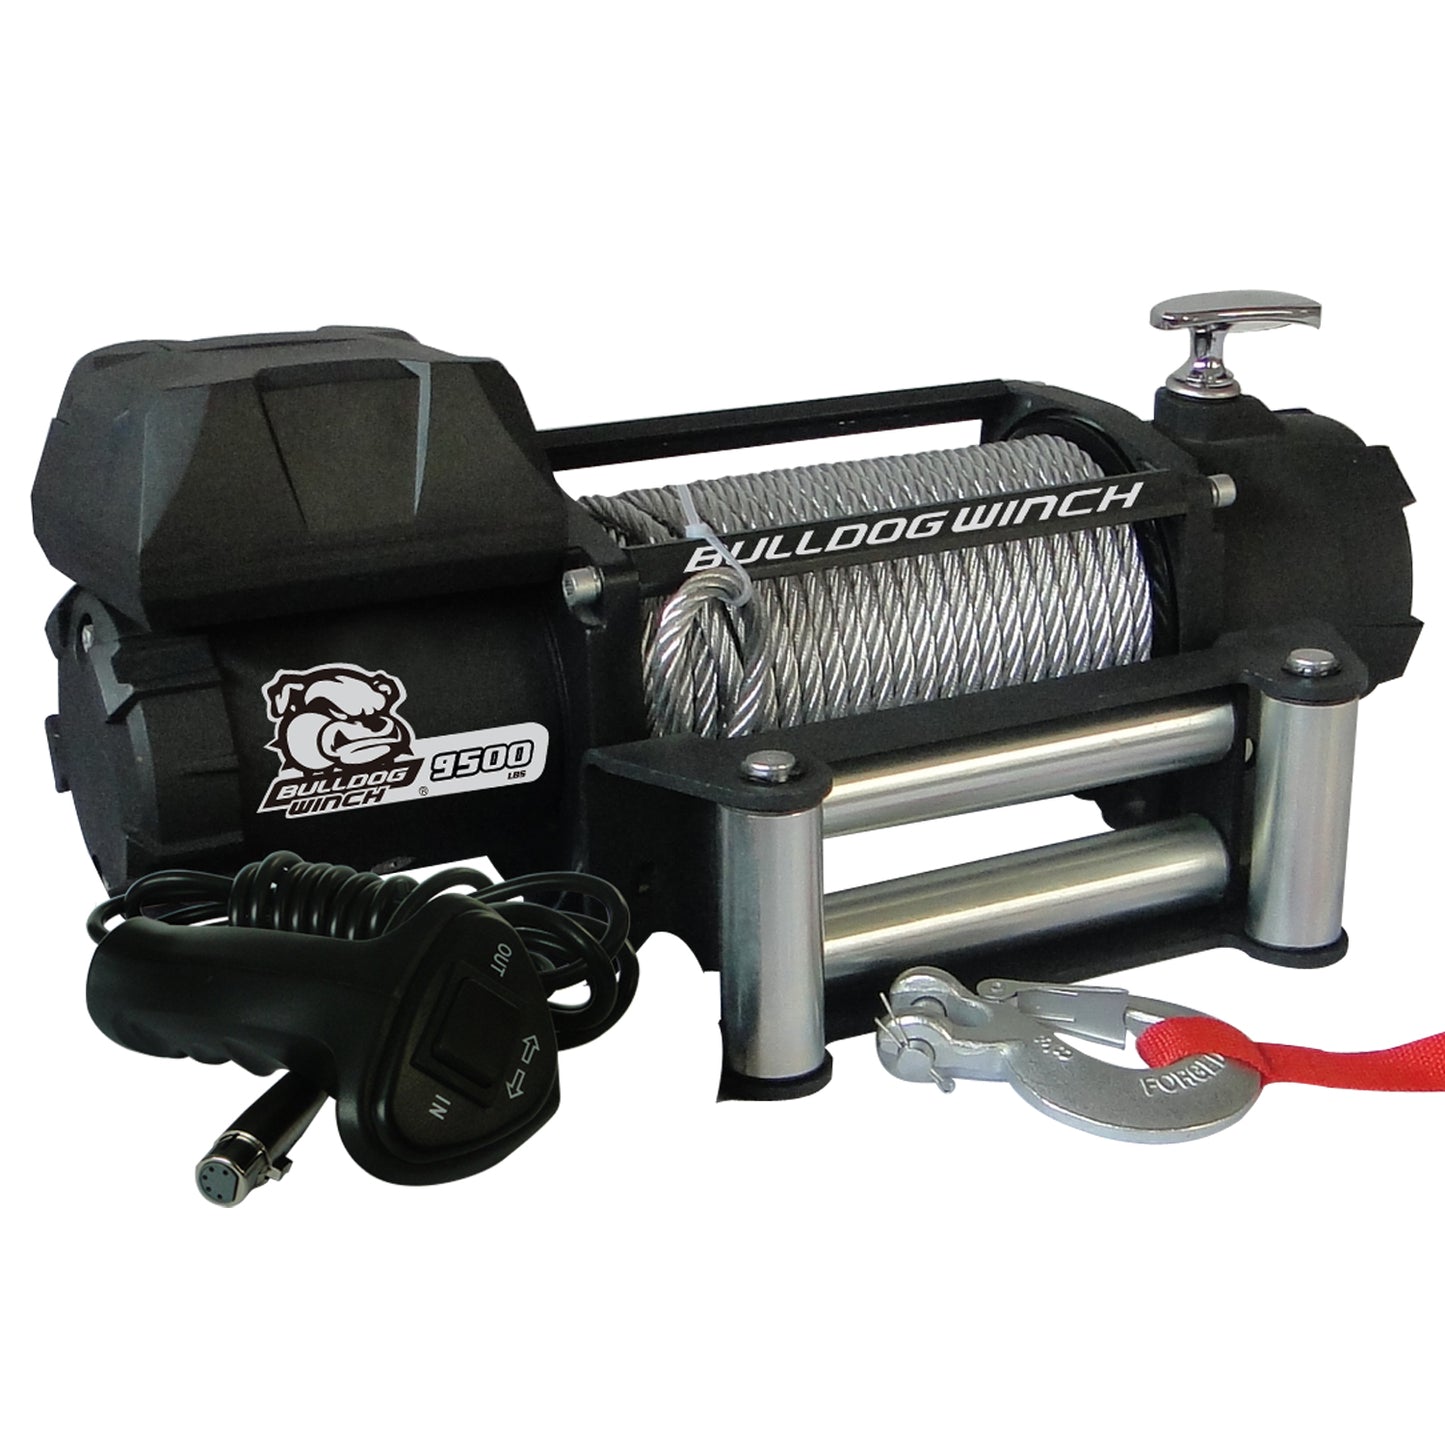 Bulldog Winch 9,500 LB Winch 100 Ft Wire Rope 5.5hp Series Wound Motor Roller Fairlead